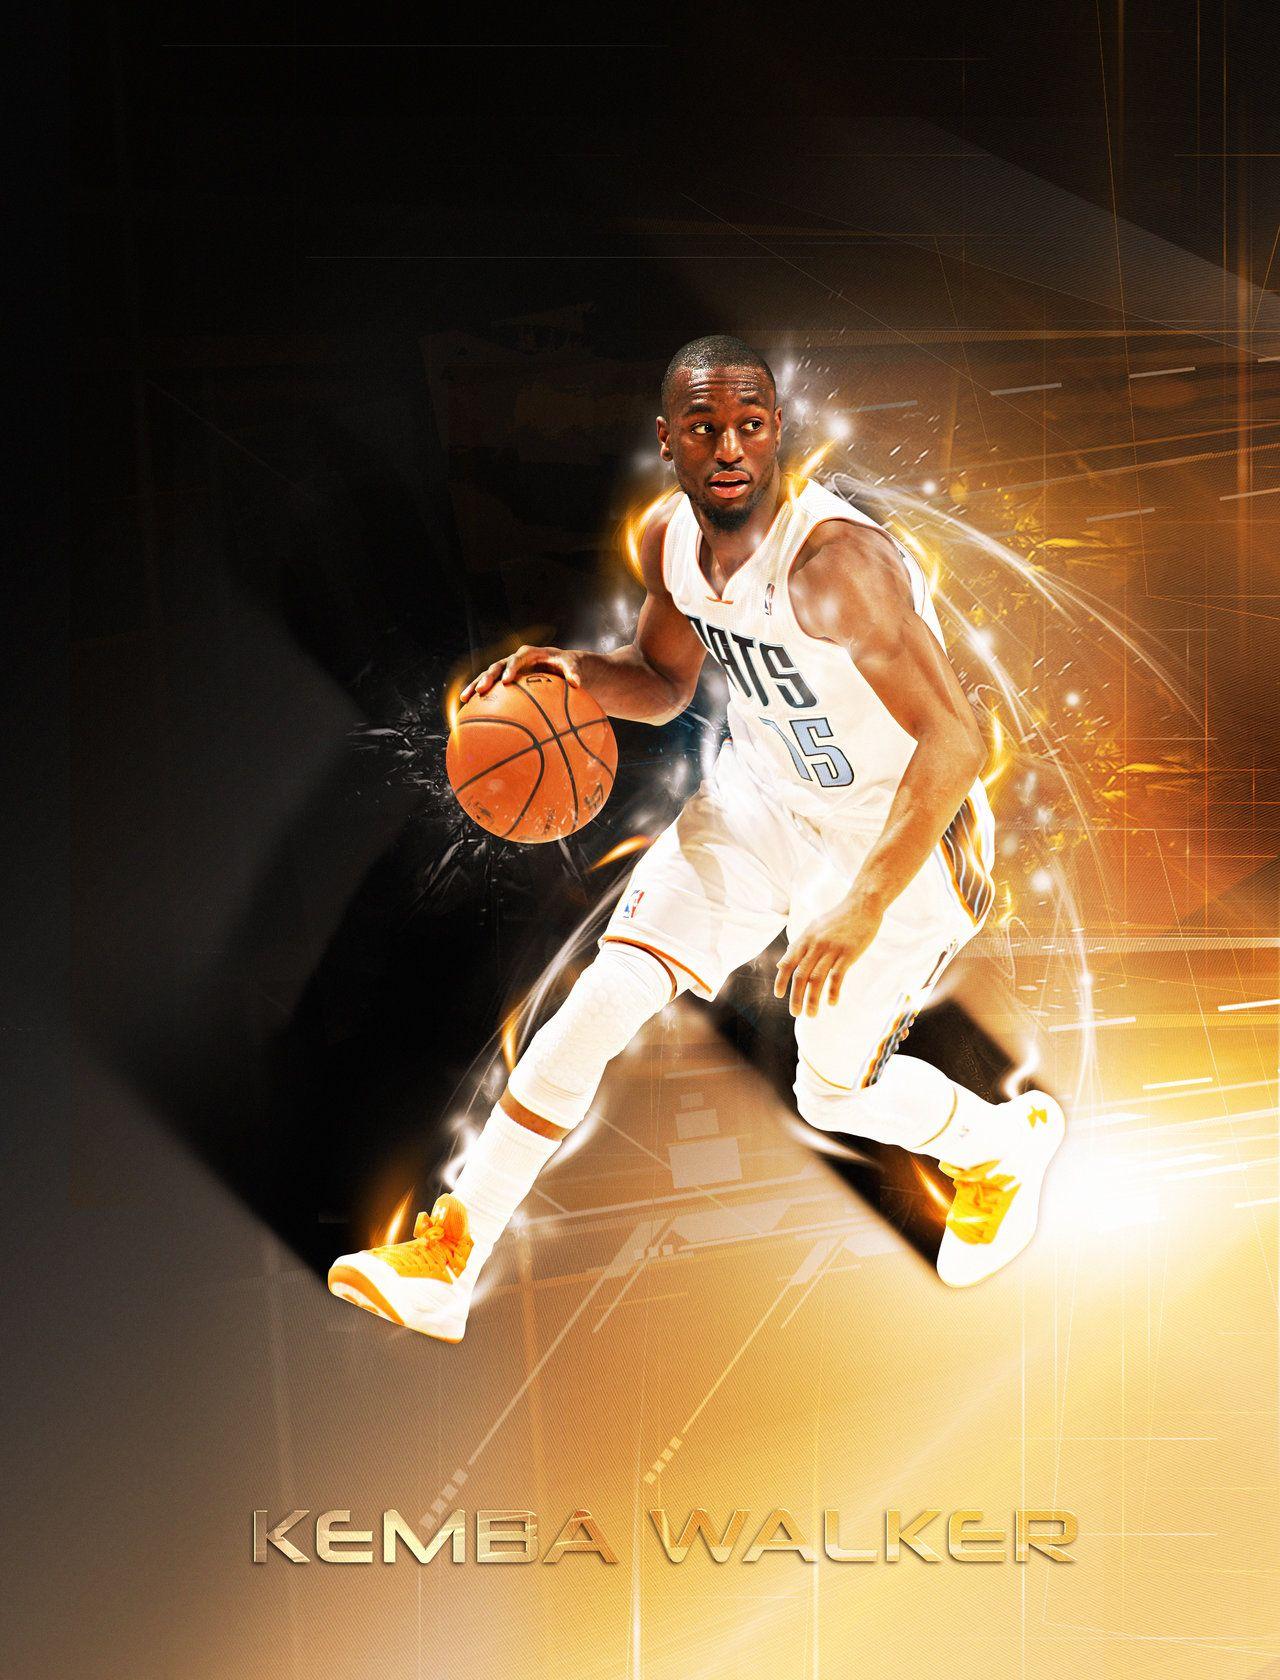 The Go To Guy, Kemba Walker By HZ Designs